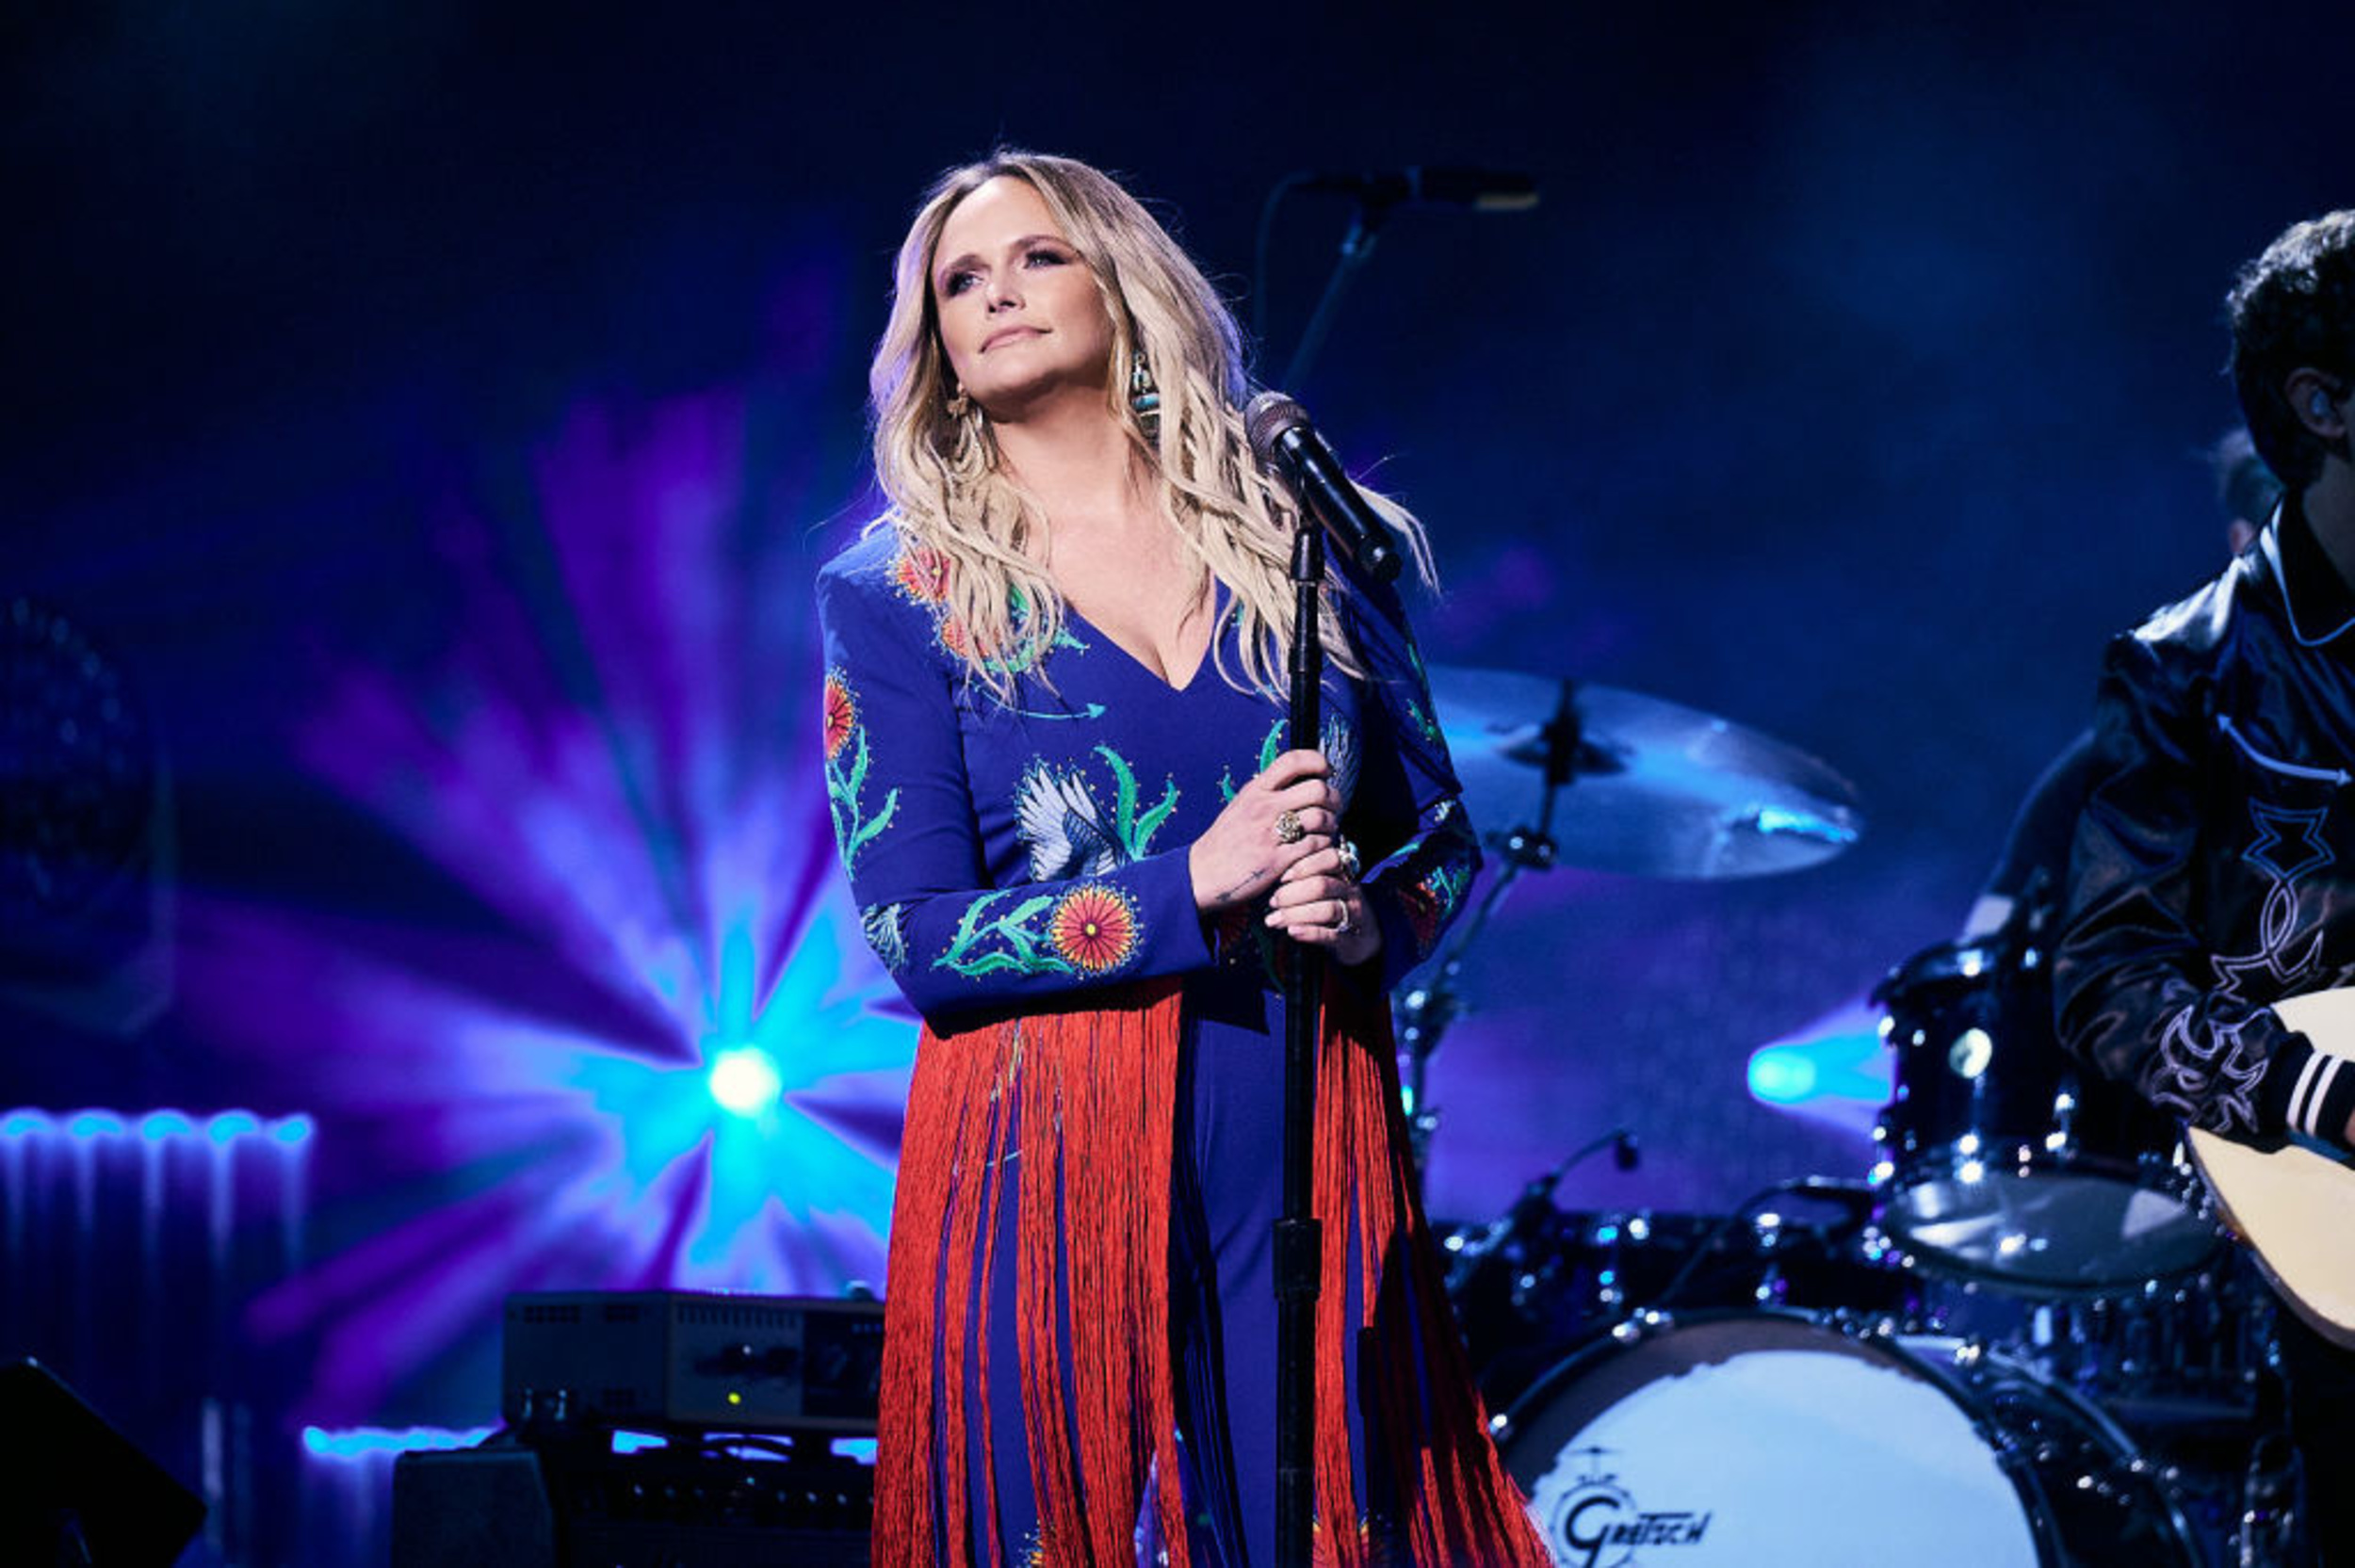 <p>Miranda Lambert's 2020 ballad "Settling Down" is essential for anyone who, like Lambert sings in this song, has their "feet on the ground and head up in the clouds." </p><p>You may also like: <a href='https://www.yardbarker.com/entertainment/articles/23_films_that_were_overlooked_because_of_barbenheimer/s1__39412637'>23 films that were overlooked because of Barbenheimer</a></p>